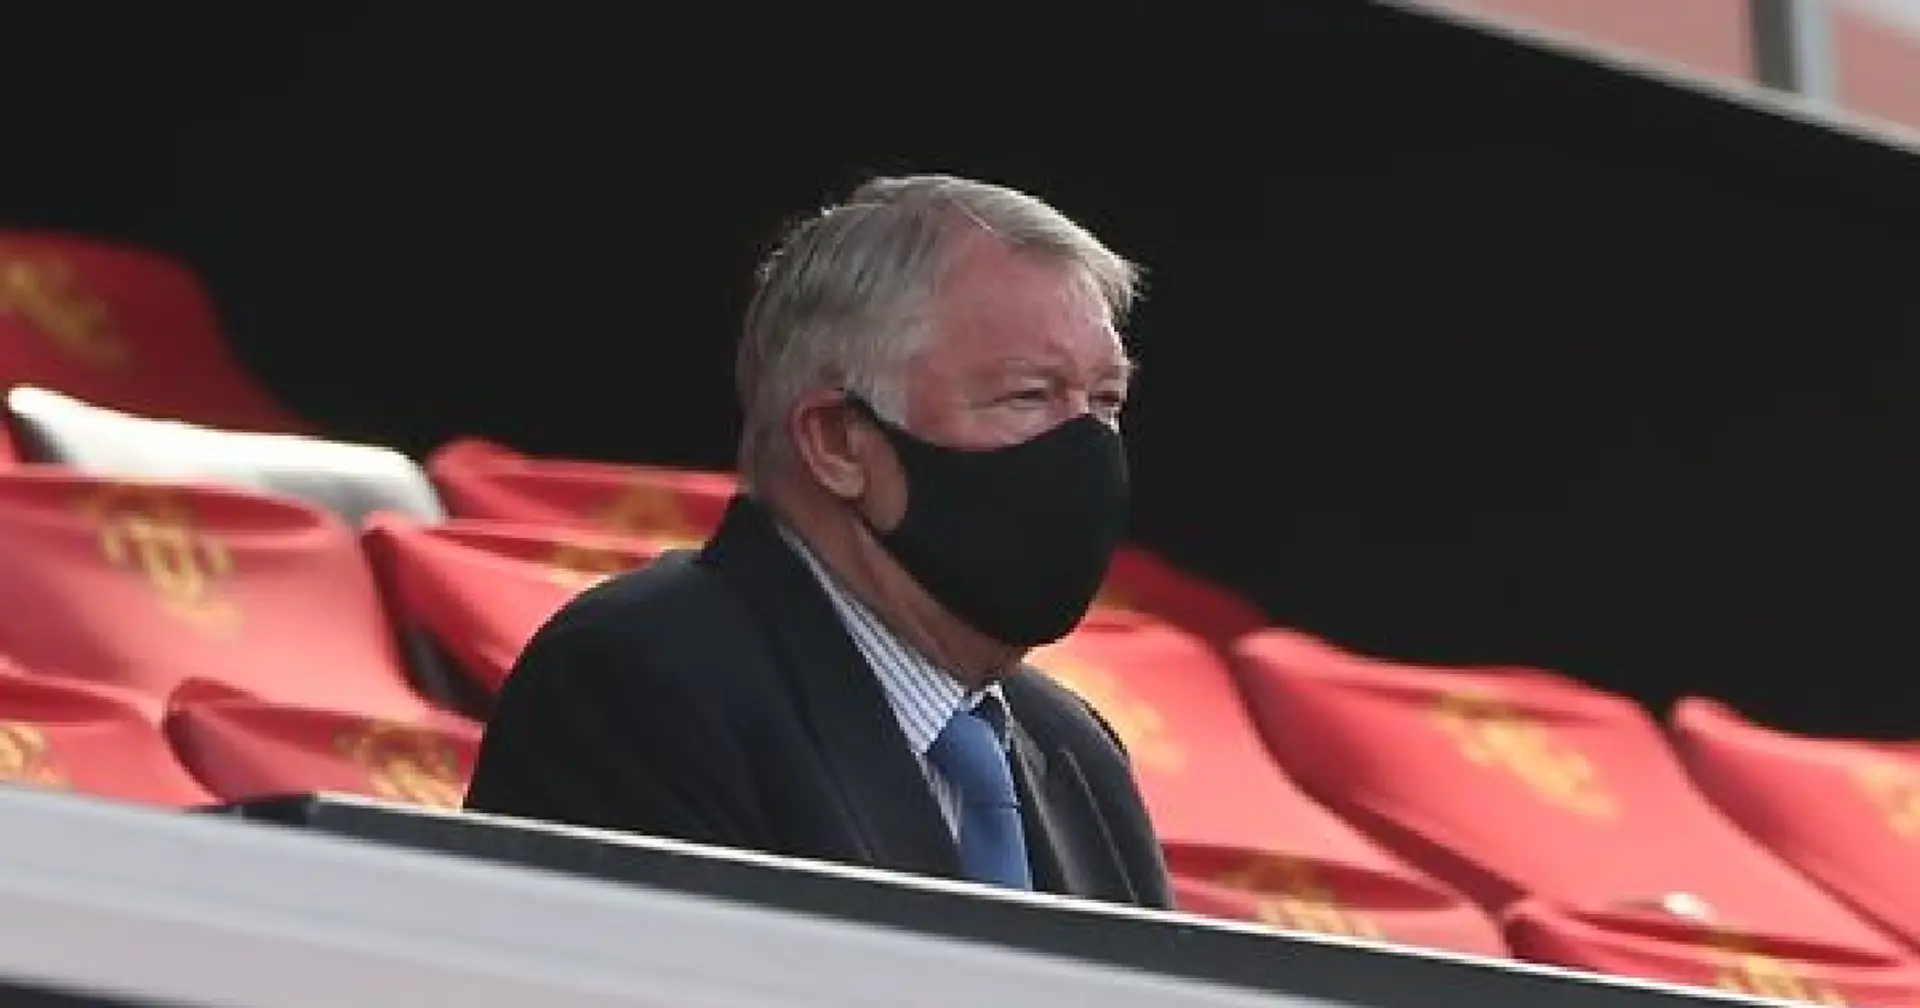 The GOAT is here: Sir Alex in attendance at Old Trafford as Man United beat Burnley 3-1